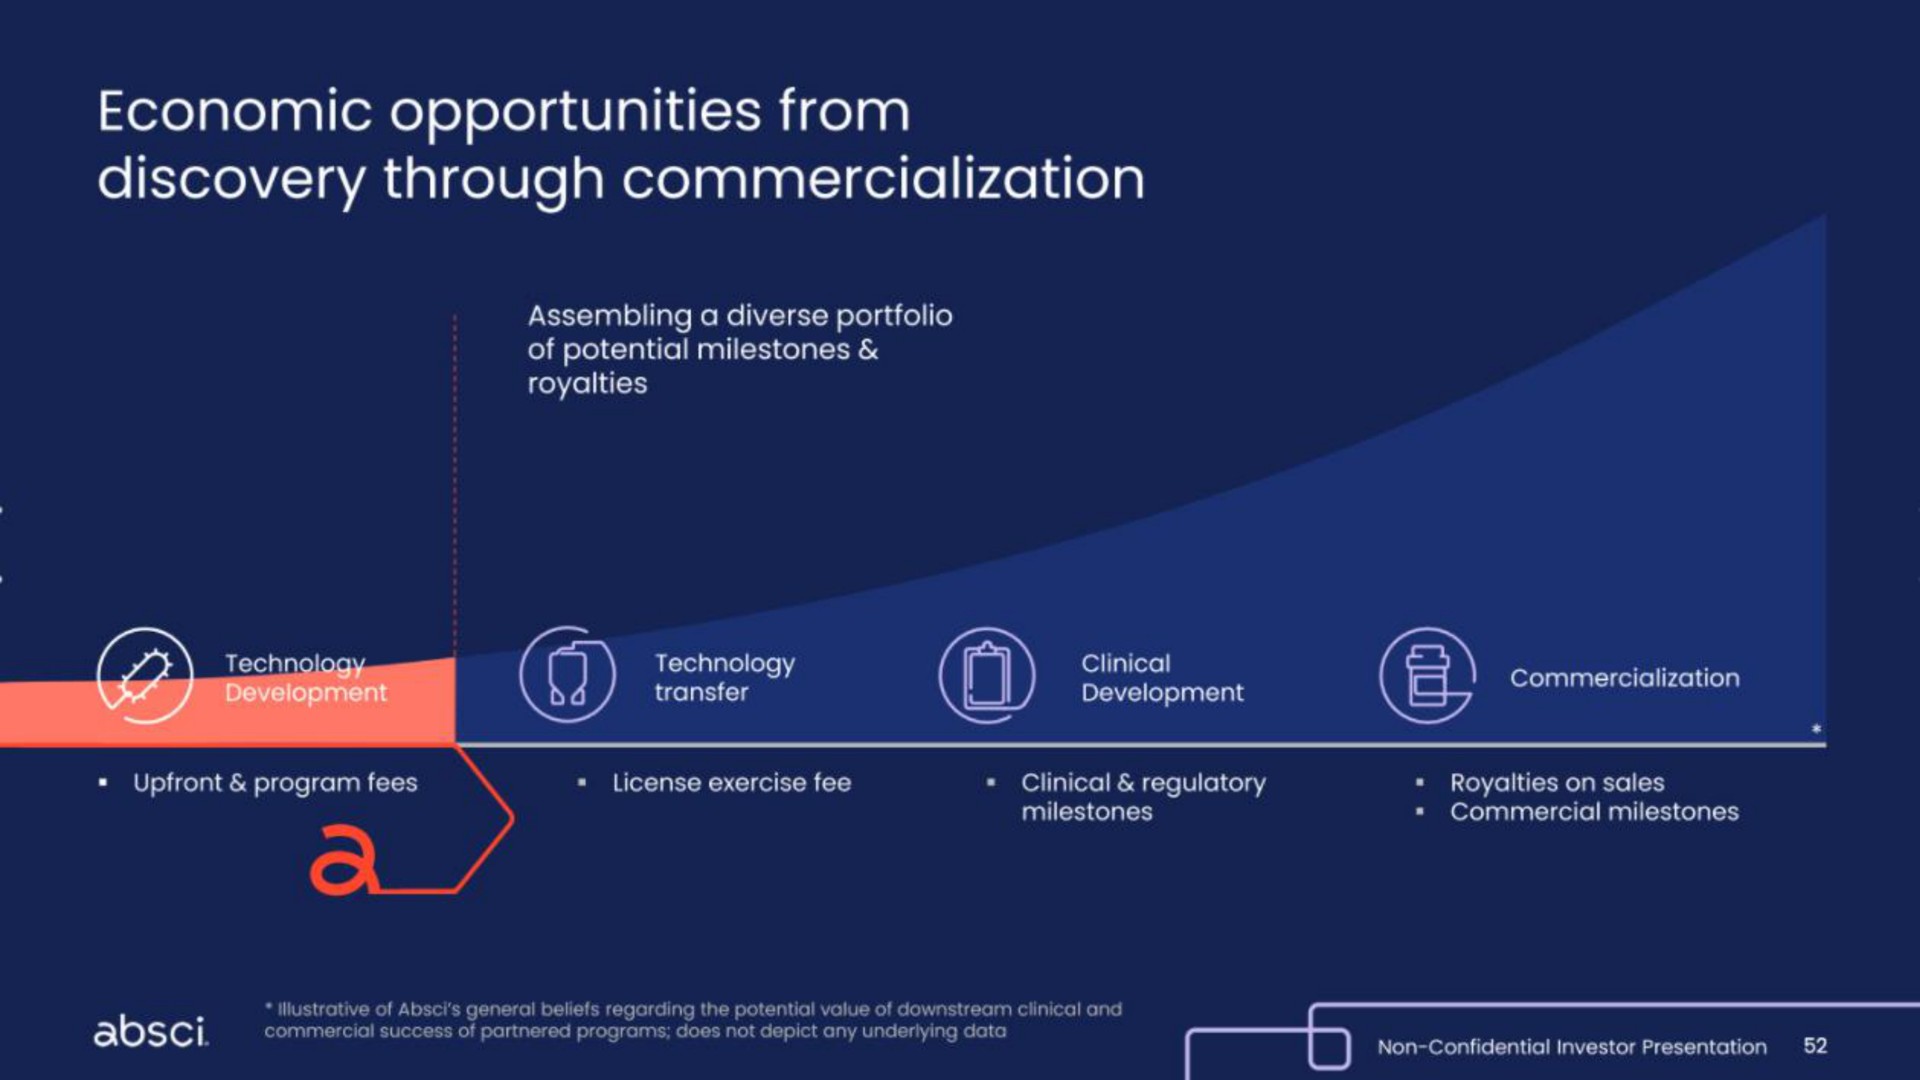 economic opportunities from discovery through commercialization | Absci